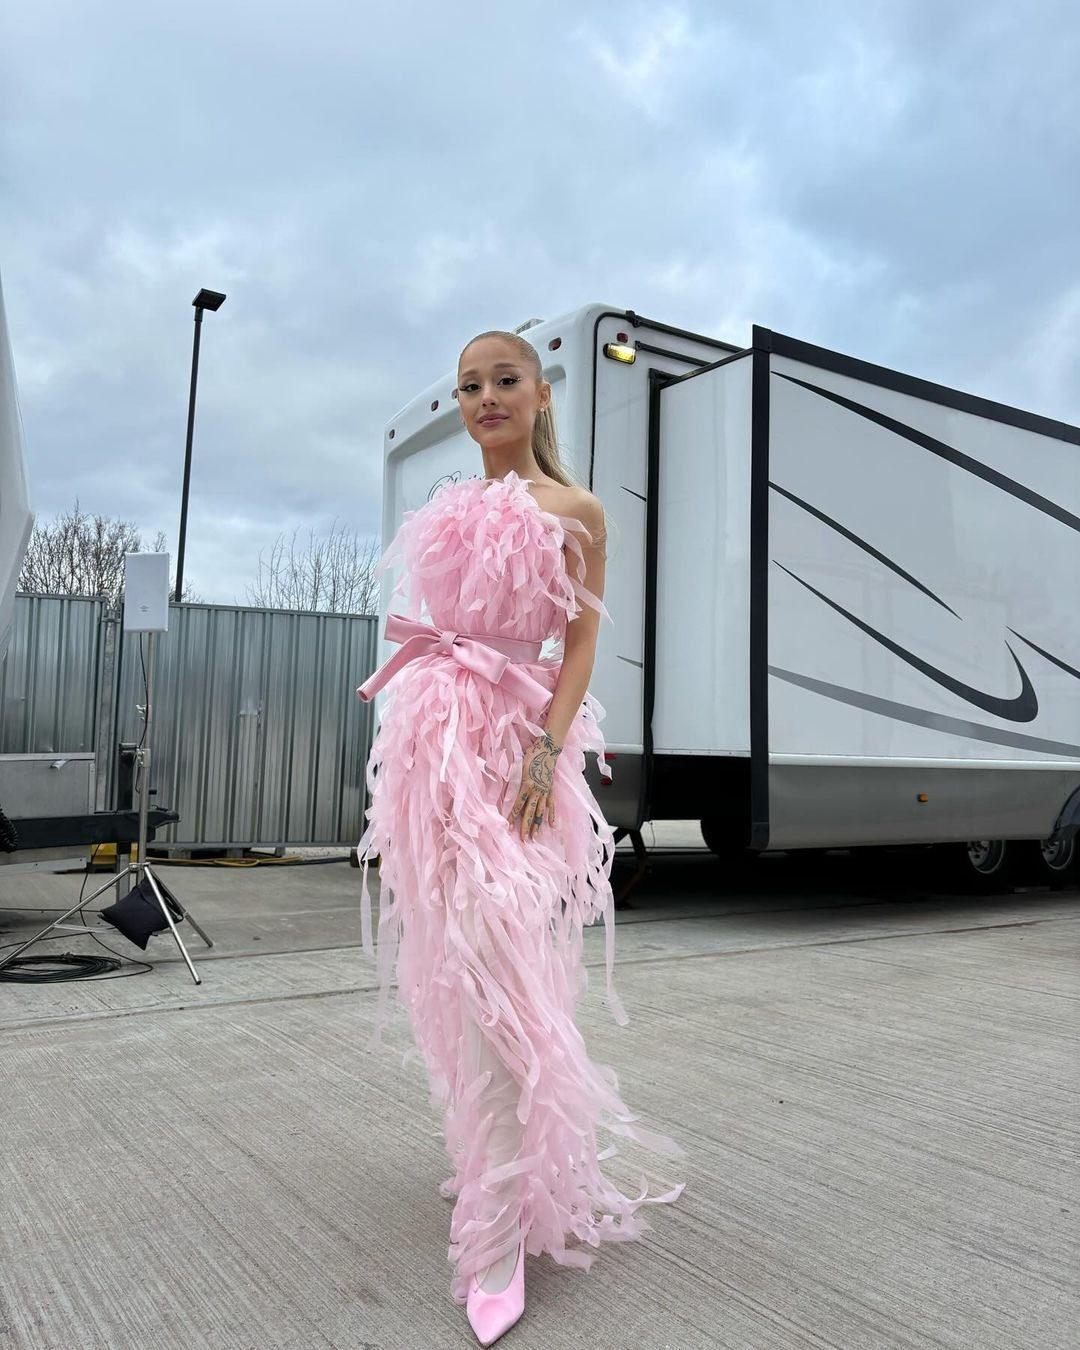 Yes, Ariana Grande just gave Glinda the Good Witch a high-fashion makeover. Head to the link in our bio to learn all about the “Wicked” star’s latest bubblegum pink look. 

#regram @arianagrande